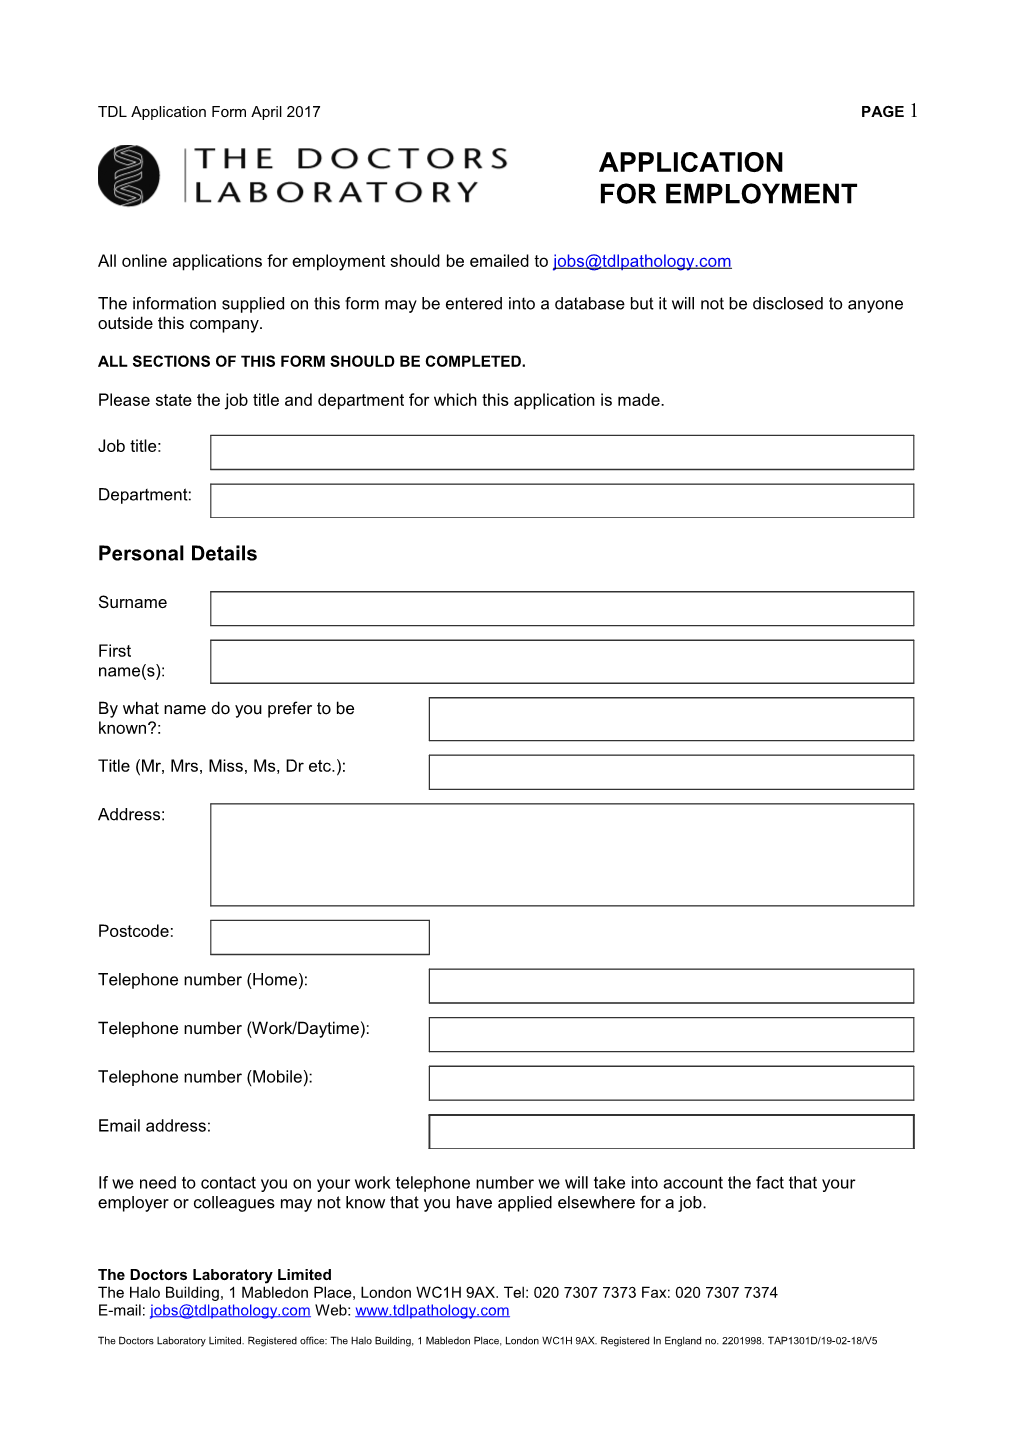 Application for Employment Form s5